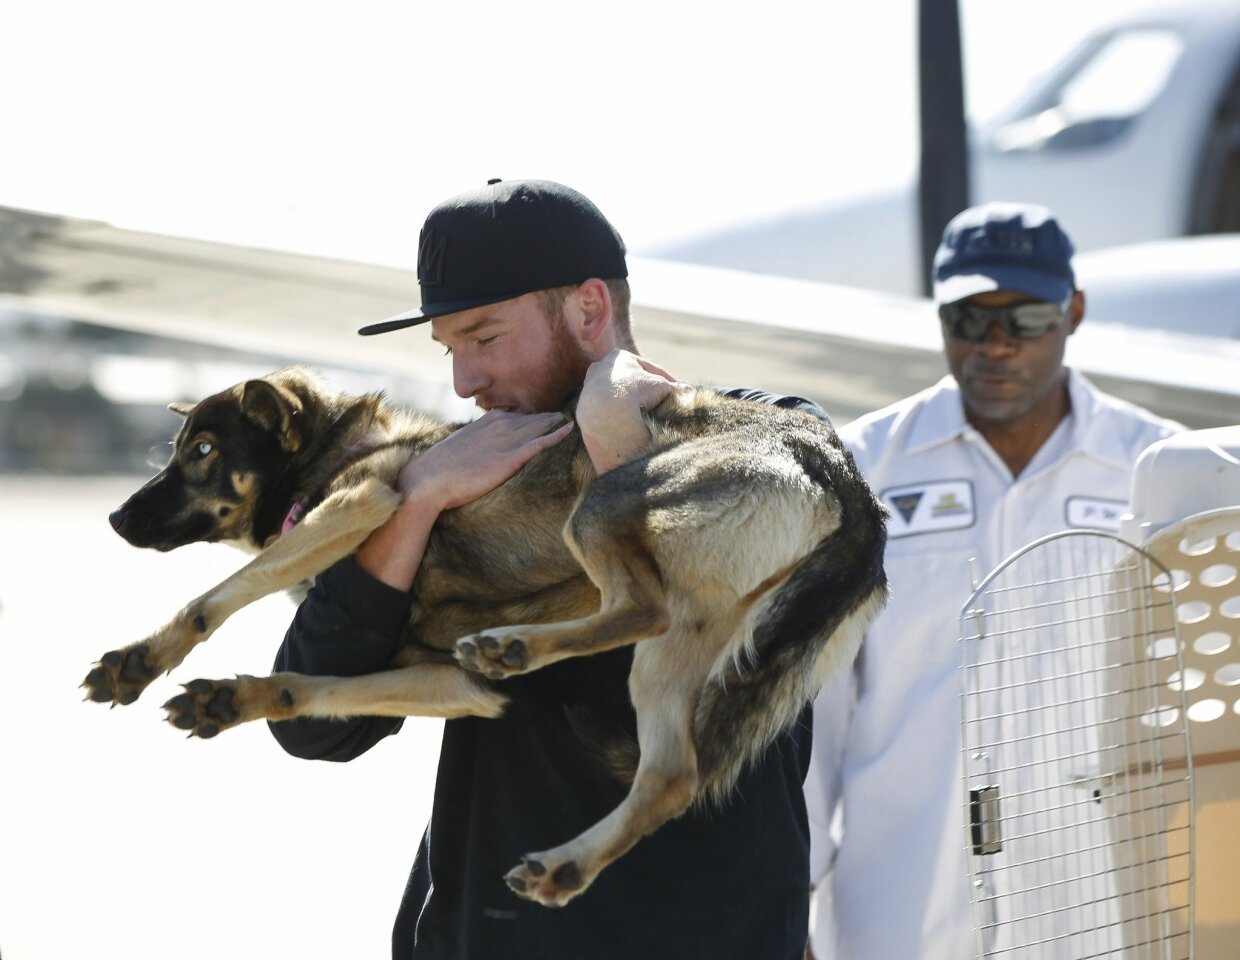 Luna, a 1 1/2-year-old female German Shepherd and husky mix that fell off a fishing boat in February and found yesterday on San Clemente Island, is picked up by Conner Lamb, a friend of the boat's captain who owns the dog.